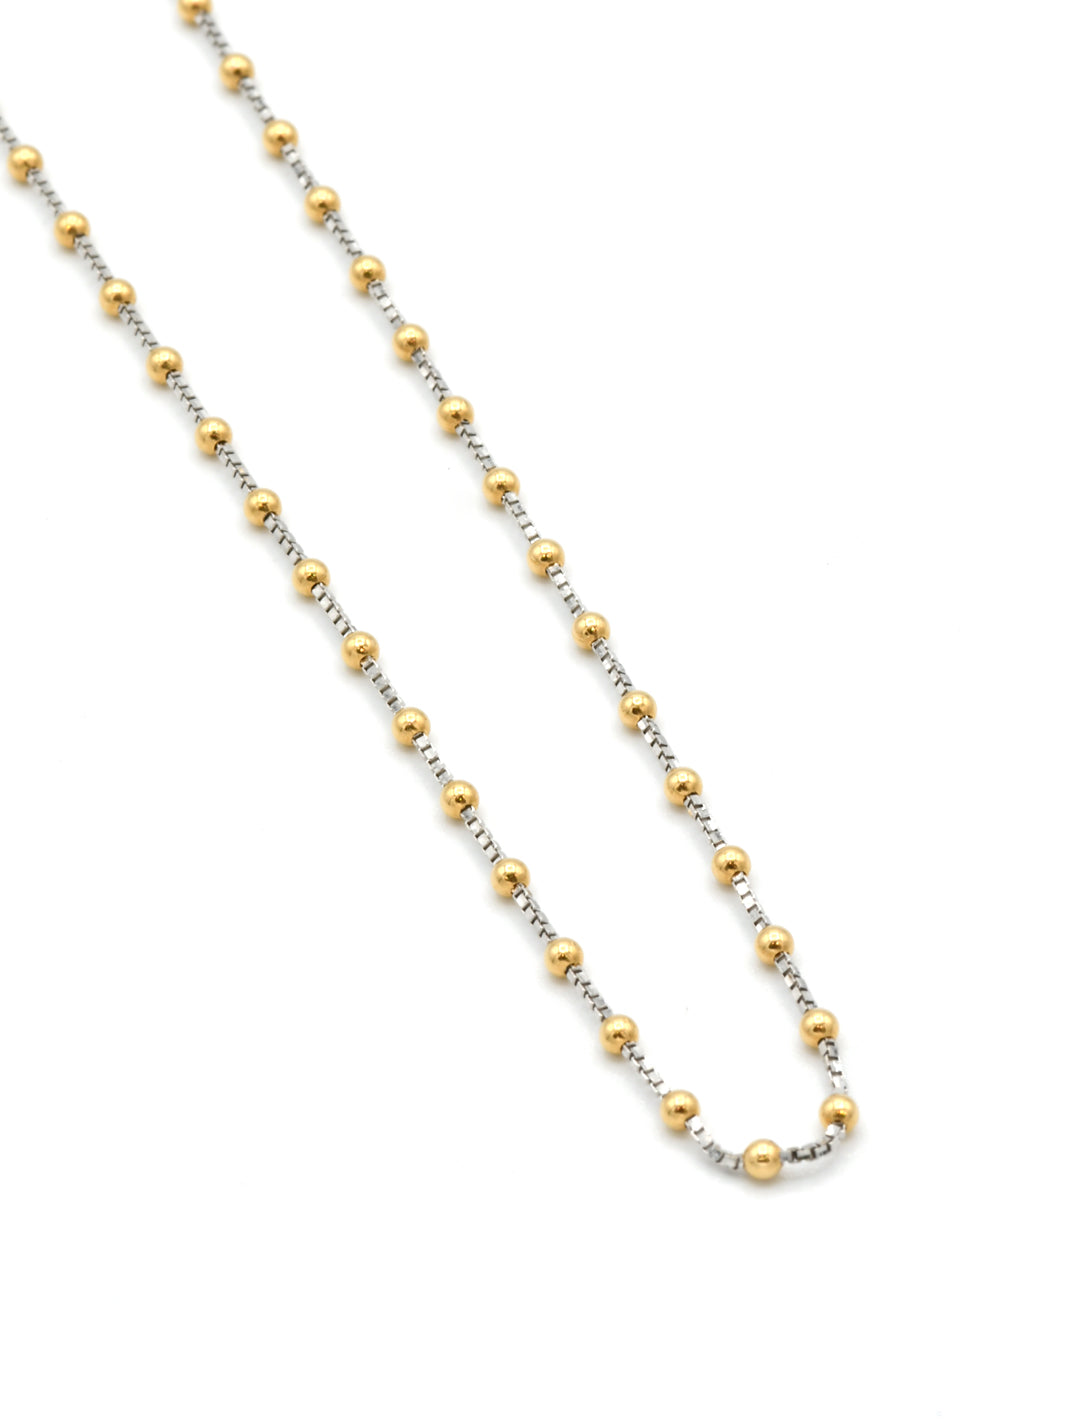 18ct Gold Two Tone Ball Fancy Chain - Roop Darshan